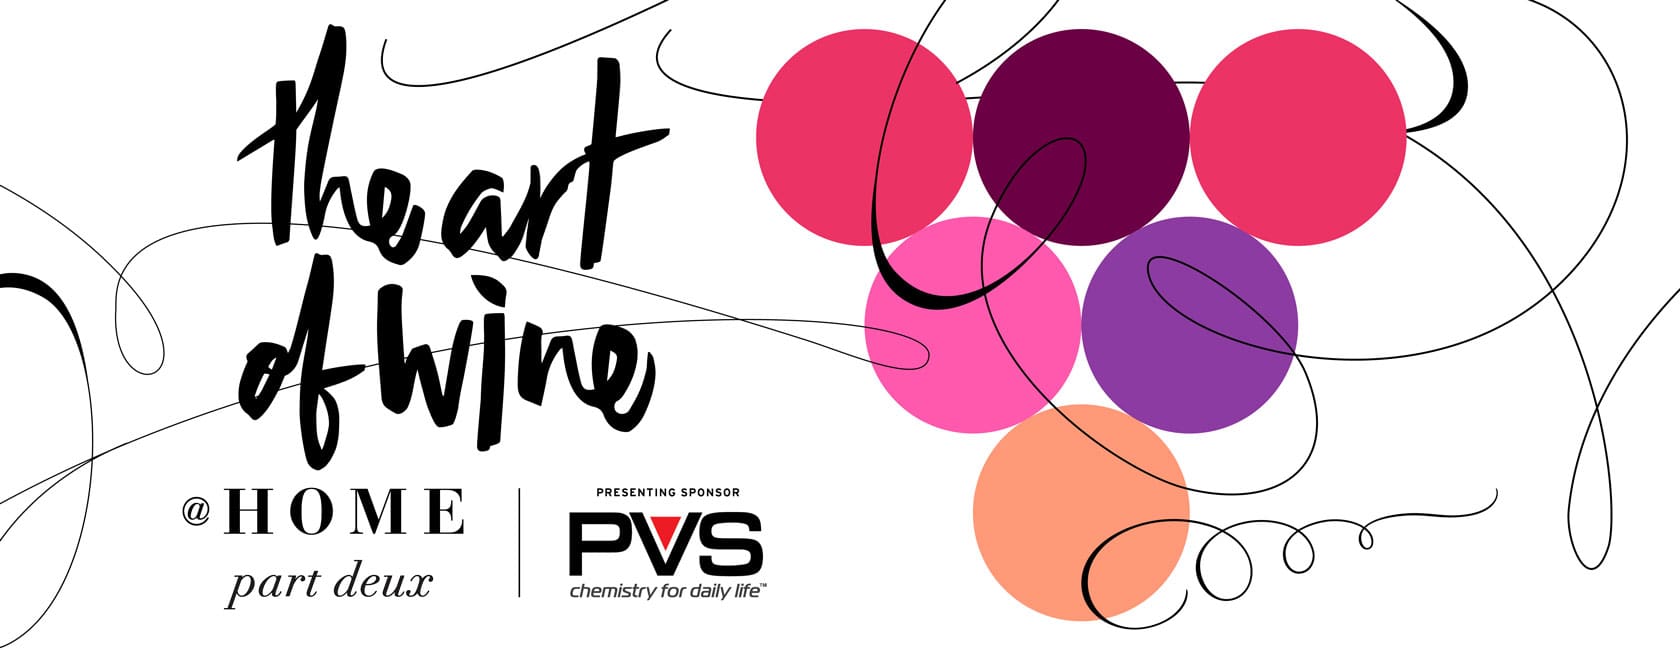 a colorful illustration of grapes with the text "Art of Wine @ Home Presenting Sponsor PVS  chemistry for daily life."